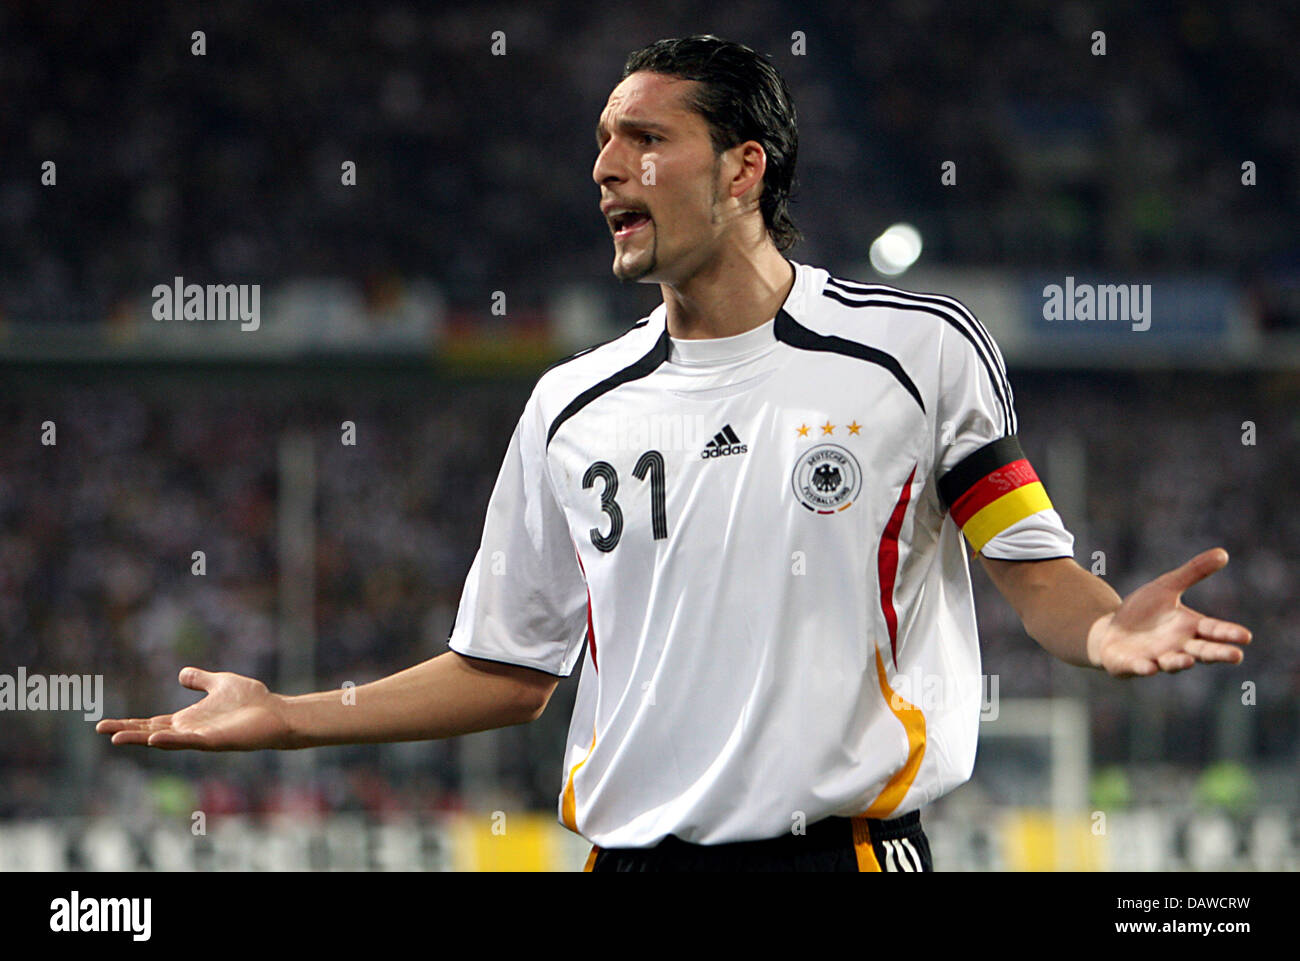 German striker Kevin Kuranyi argues with the linesman during the test cap Germany v Denmark at the MSV Arena stadium of Duisburg, Germany, Wednesday, 28 March 2007. Photo: Franz-Peter Tschauner Stock Photo